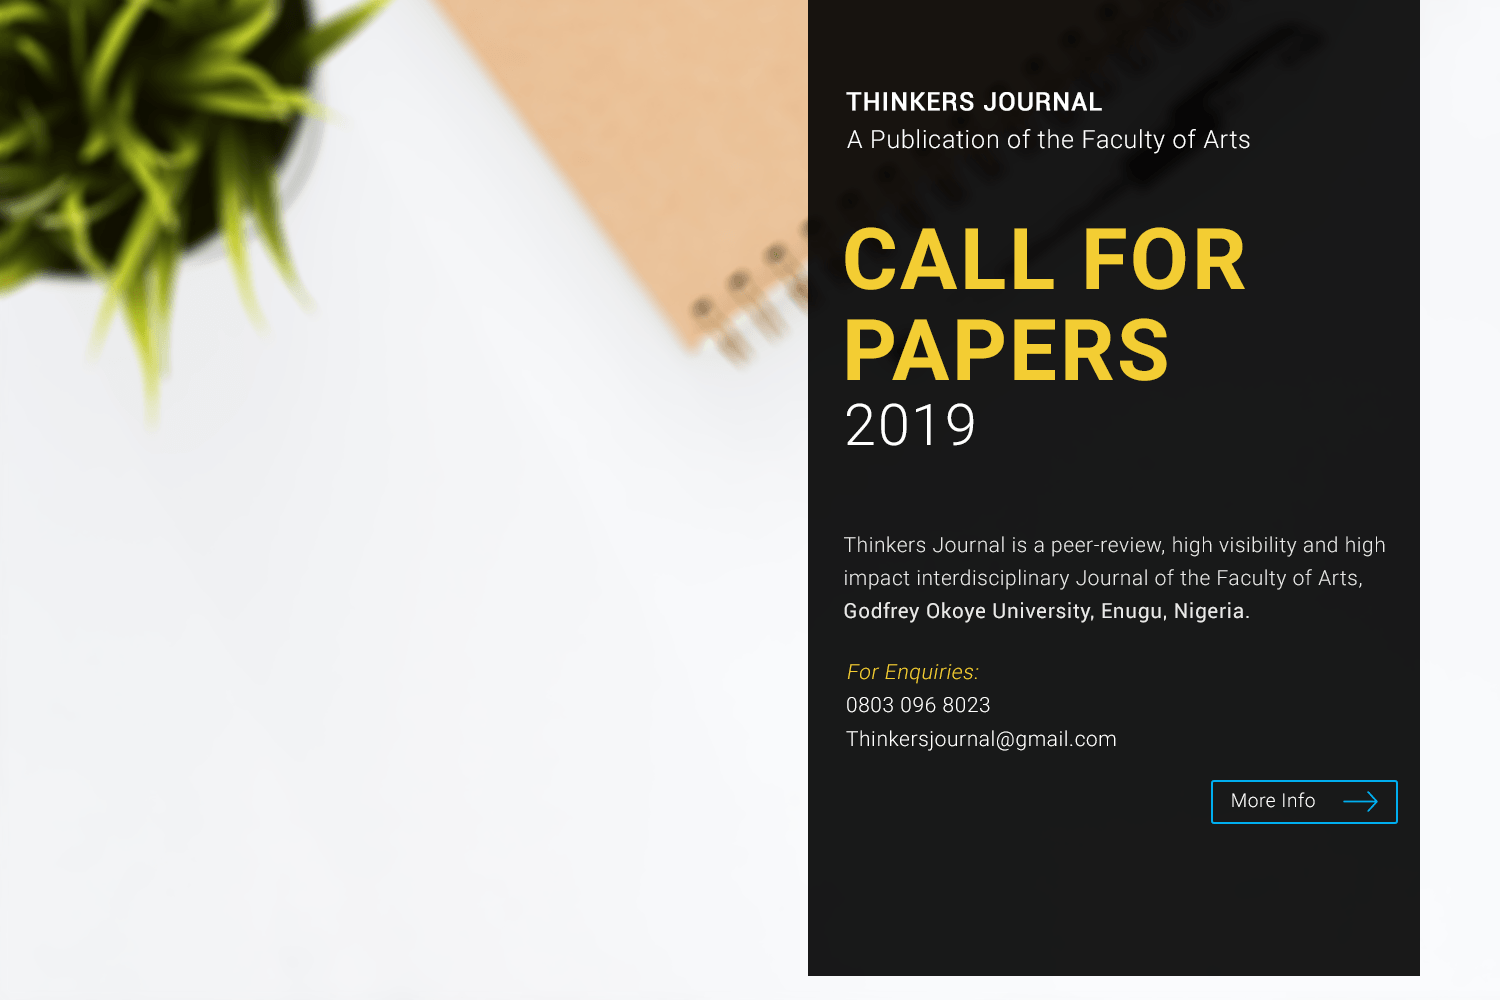 THINKERS JOURNAL – CALL FOR PAPERS